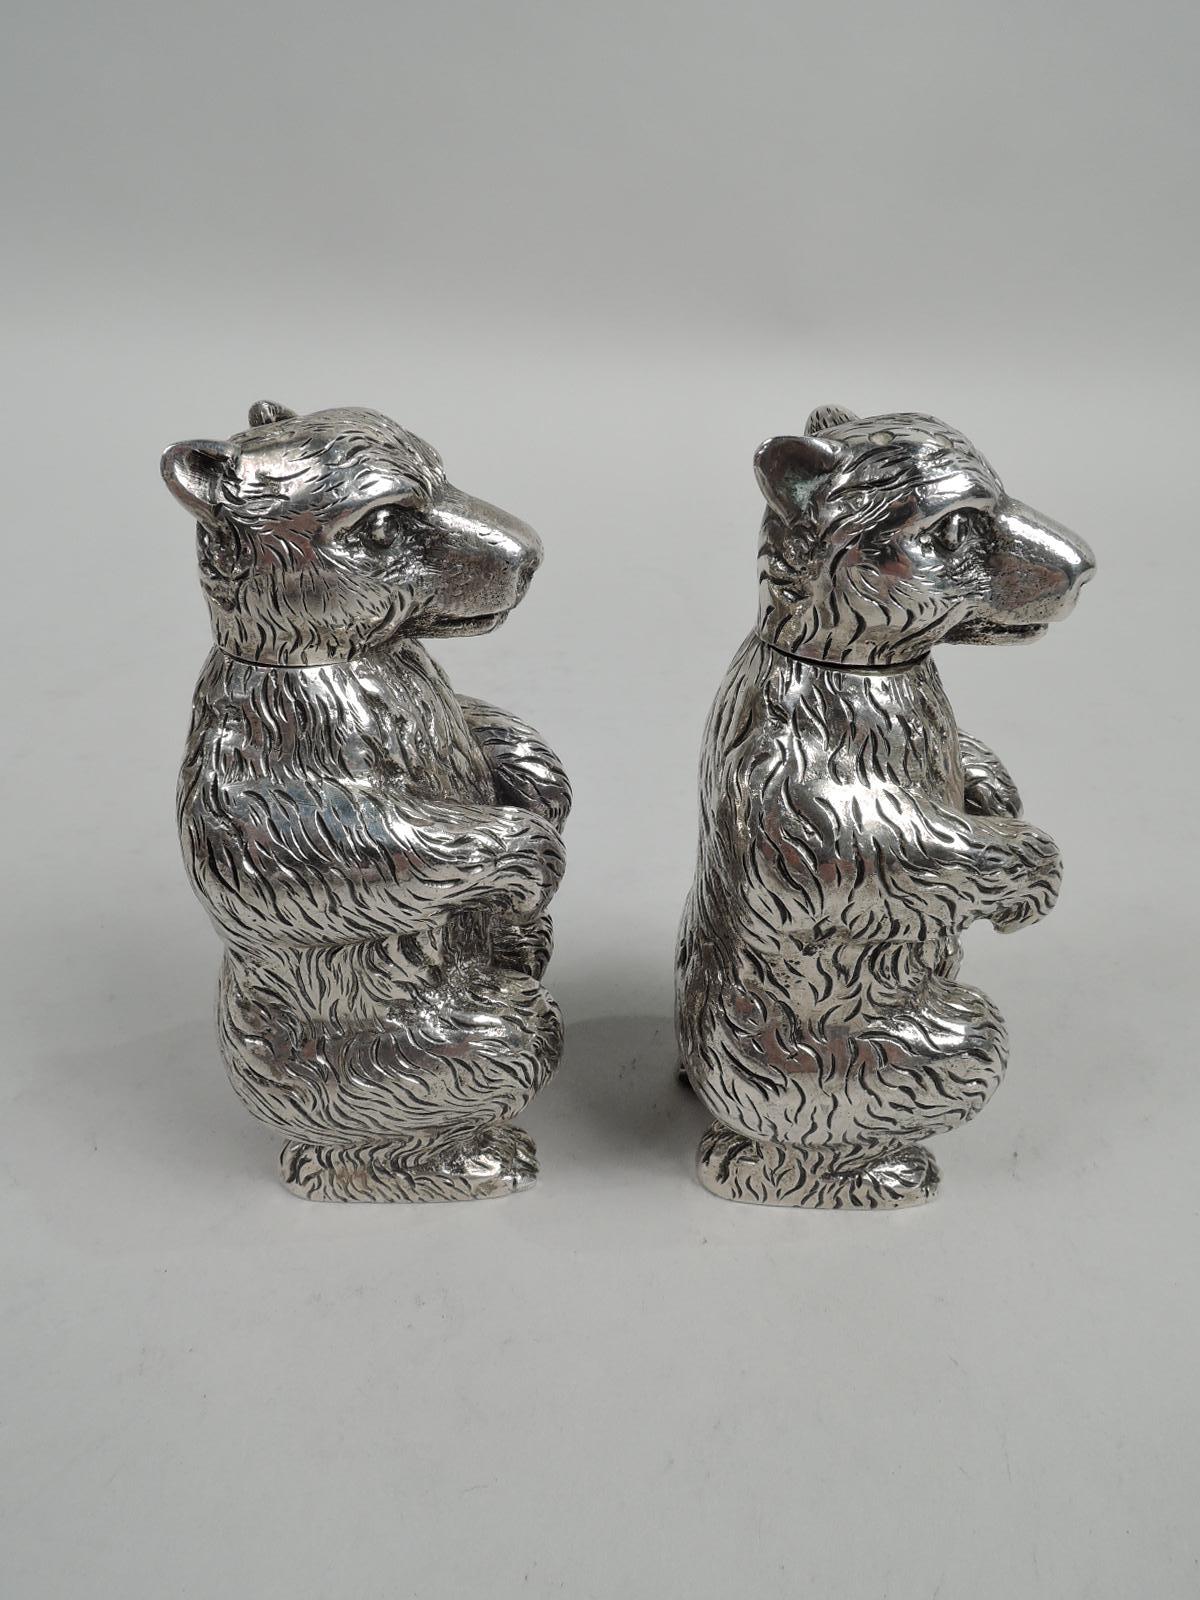 Pair of sterling silver figural animal salt and pepper shakers. Made by George Gebelein in Boston, ca 1920. Each: Bear squatting on hind paws with dangling forepaws. Detachable head with pierced top and vigilant expression. A detailed cast with